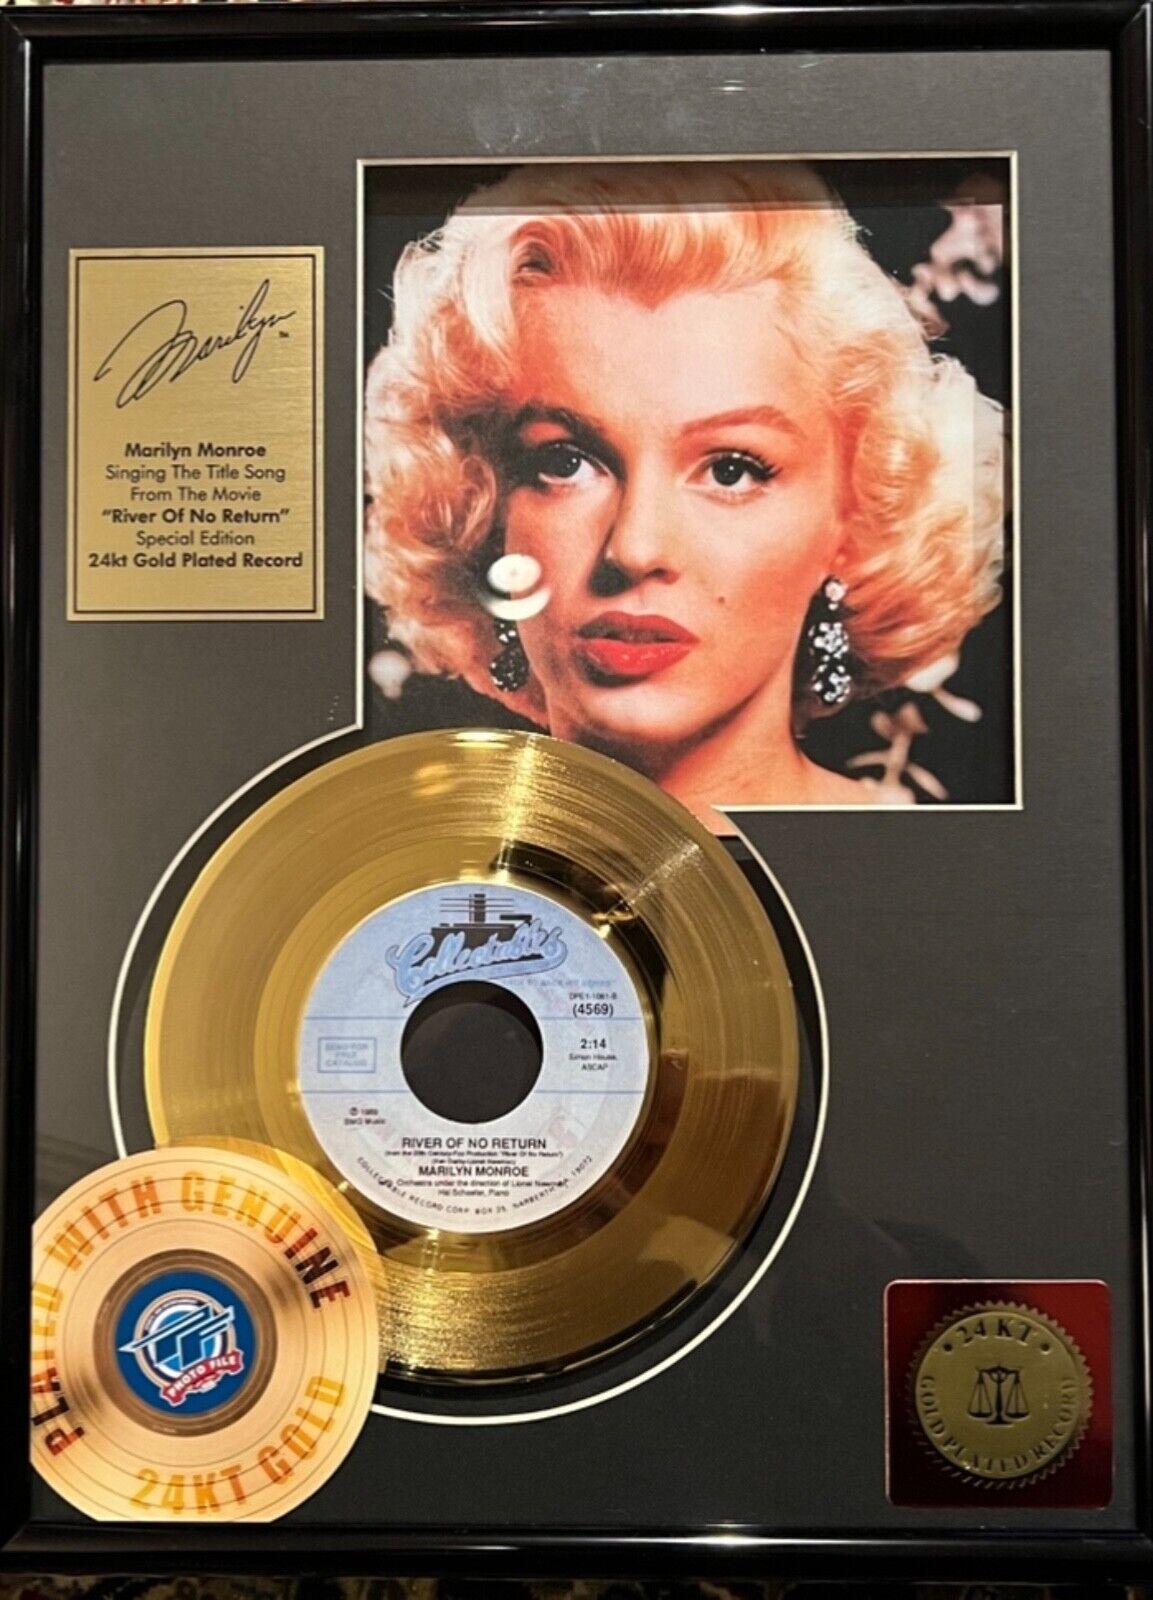 Marilyn Monroe “River of No Return” 24kt Gold Plated Record